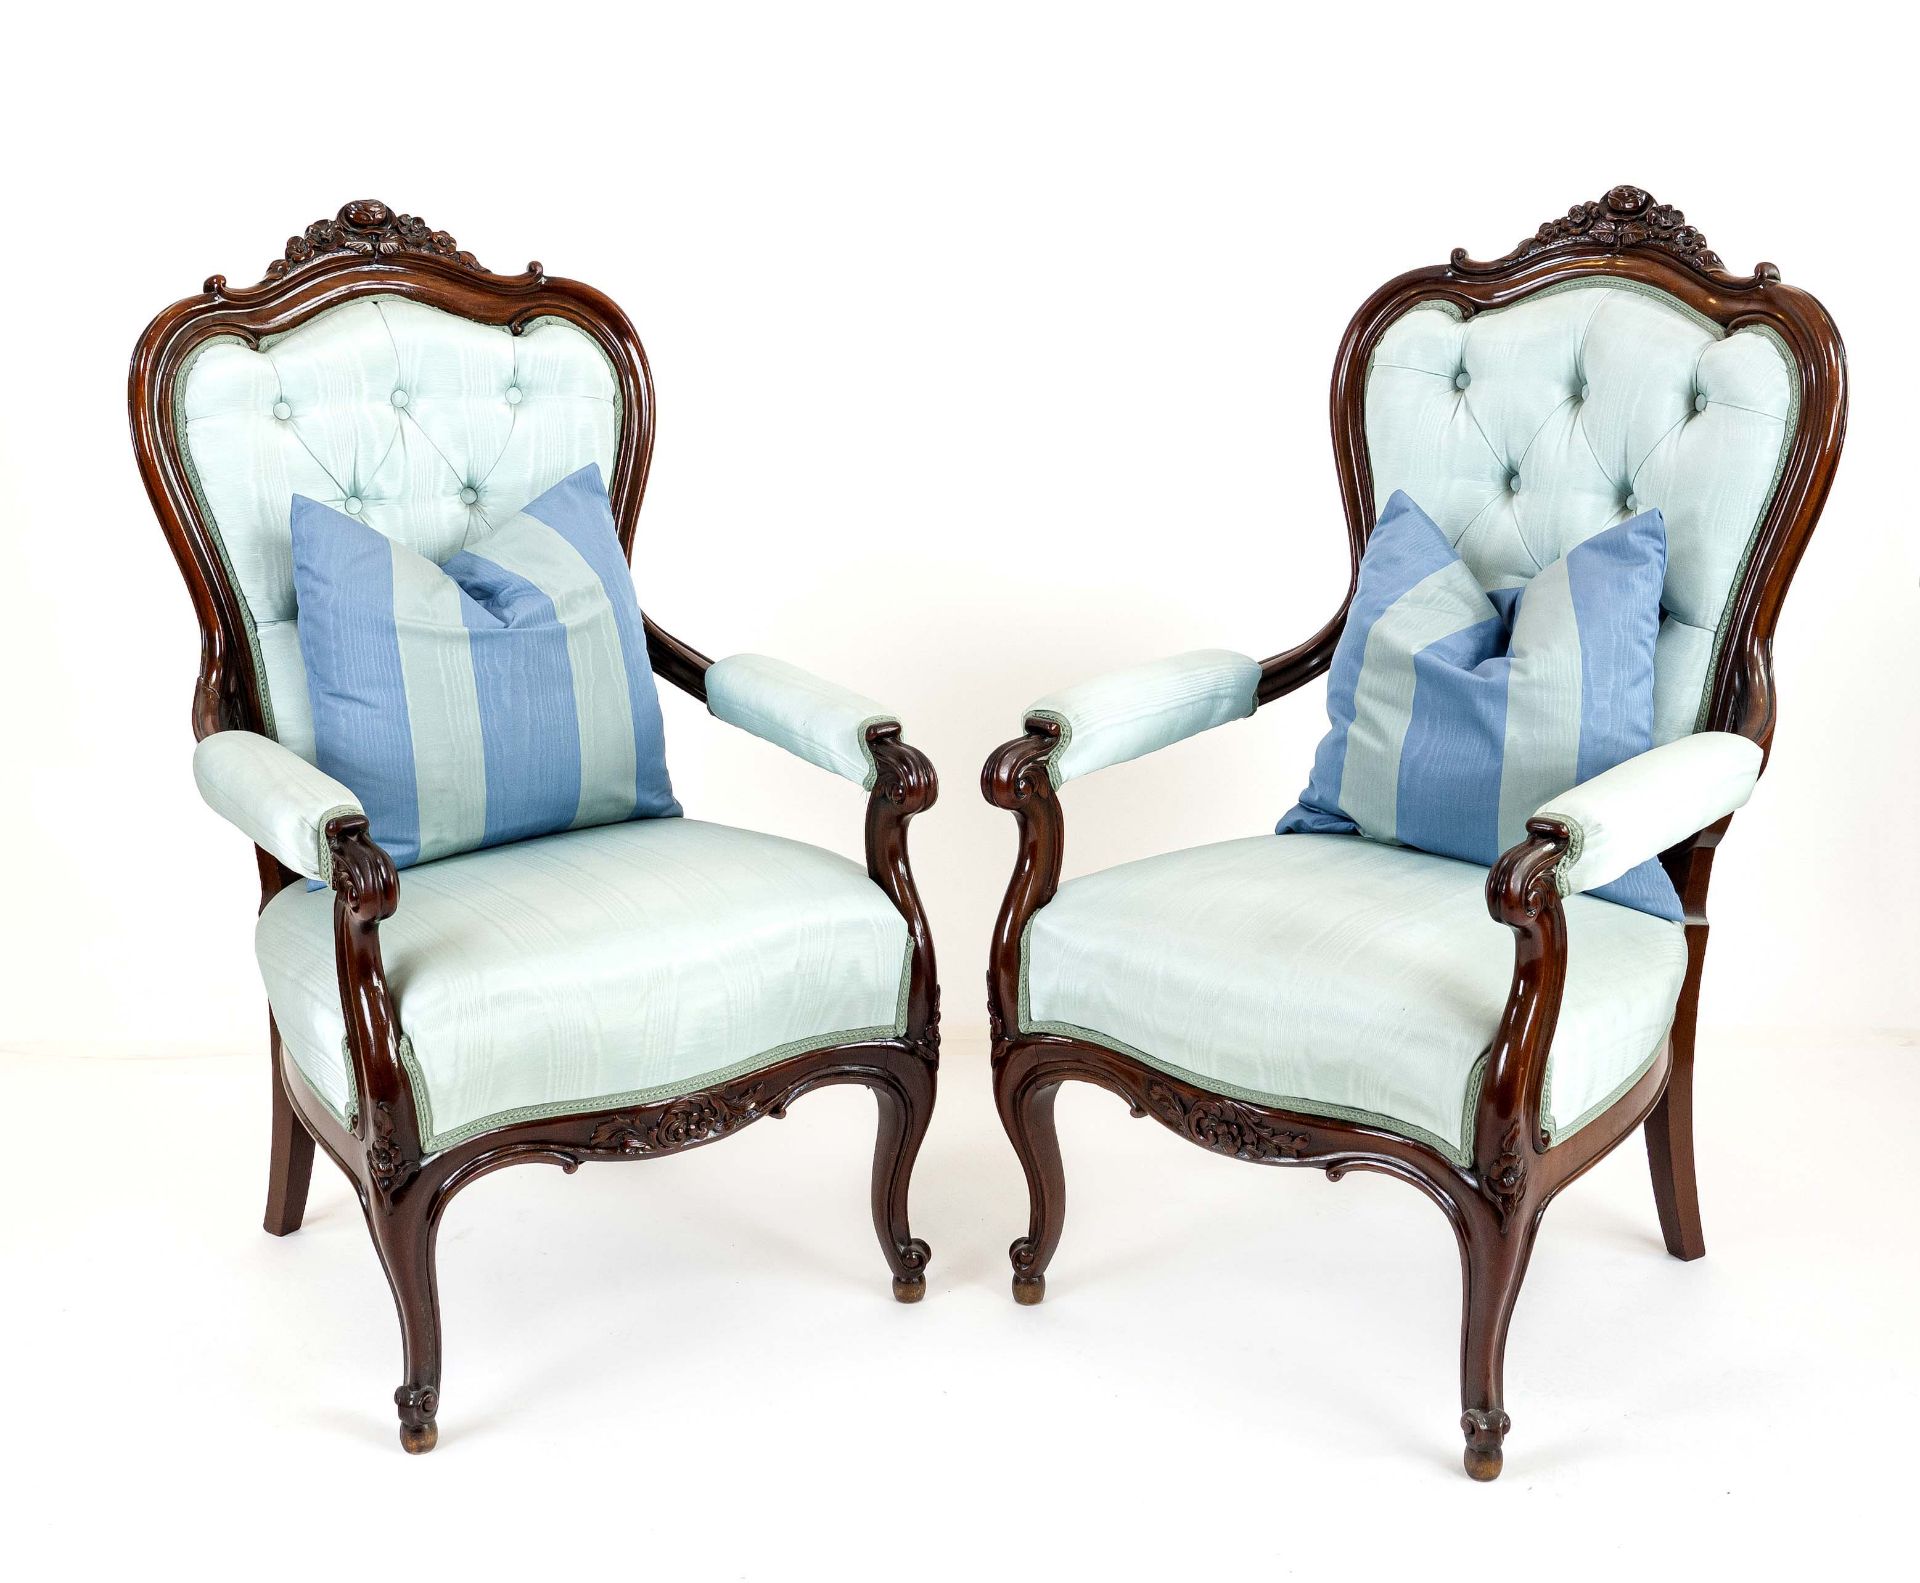 Pair of armchairs, Louis-Philippe c. 1860, mahogany, curved frame with carved top, 110 x 65 x 60